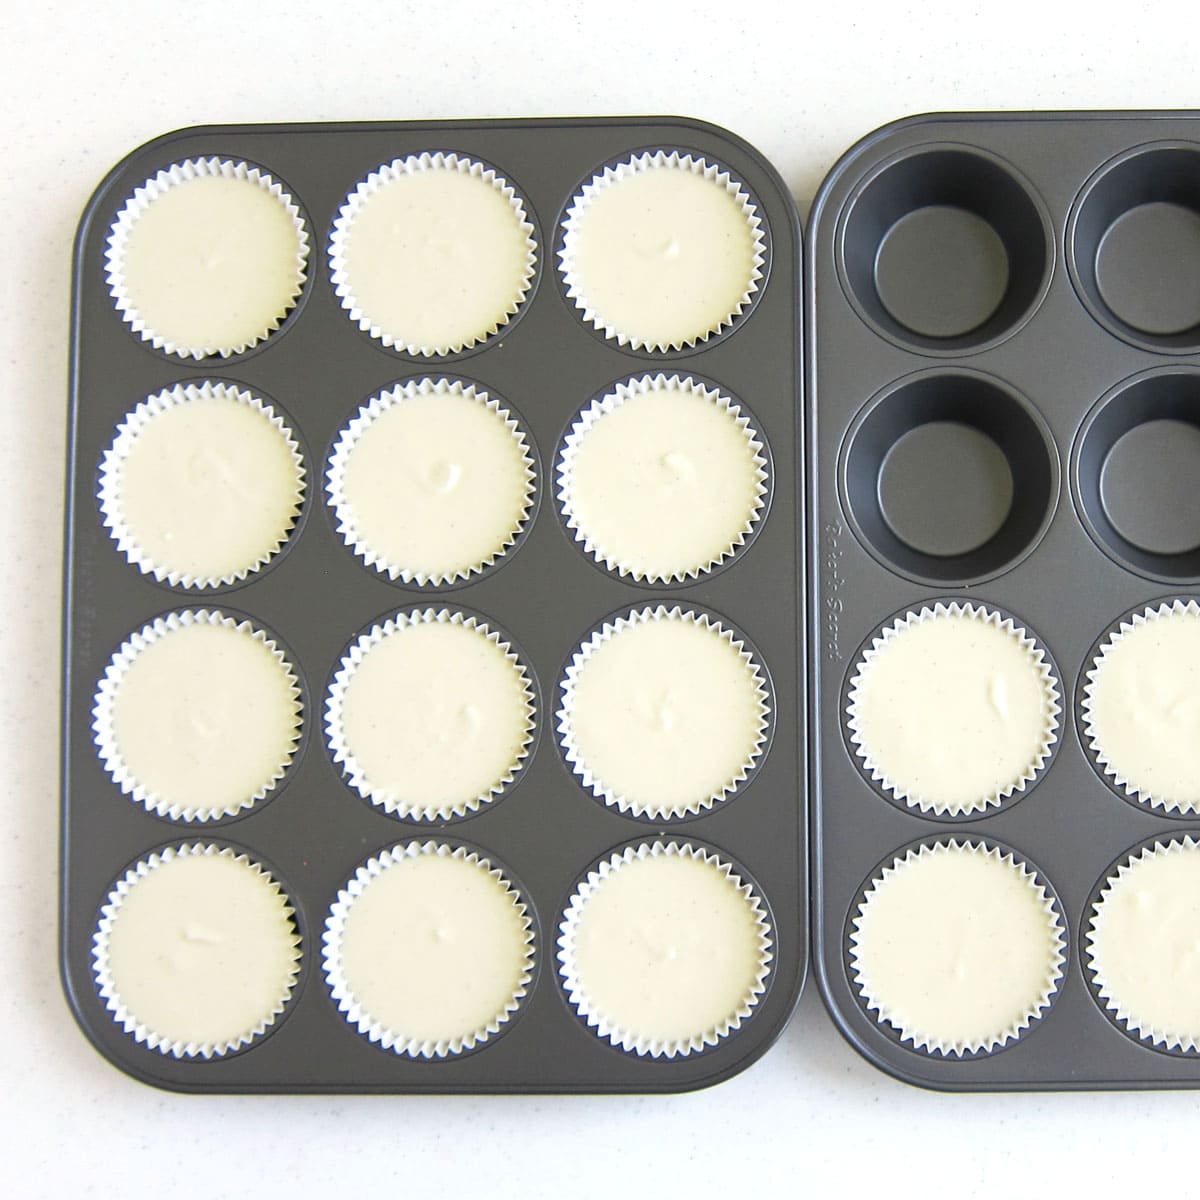 Cupcake liners filled with cheesecake filling.